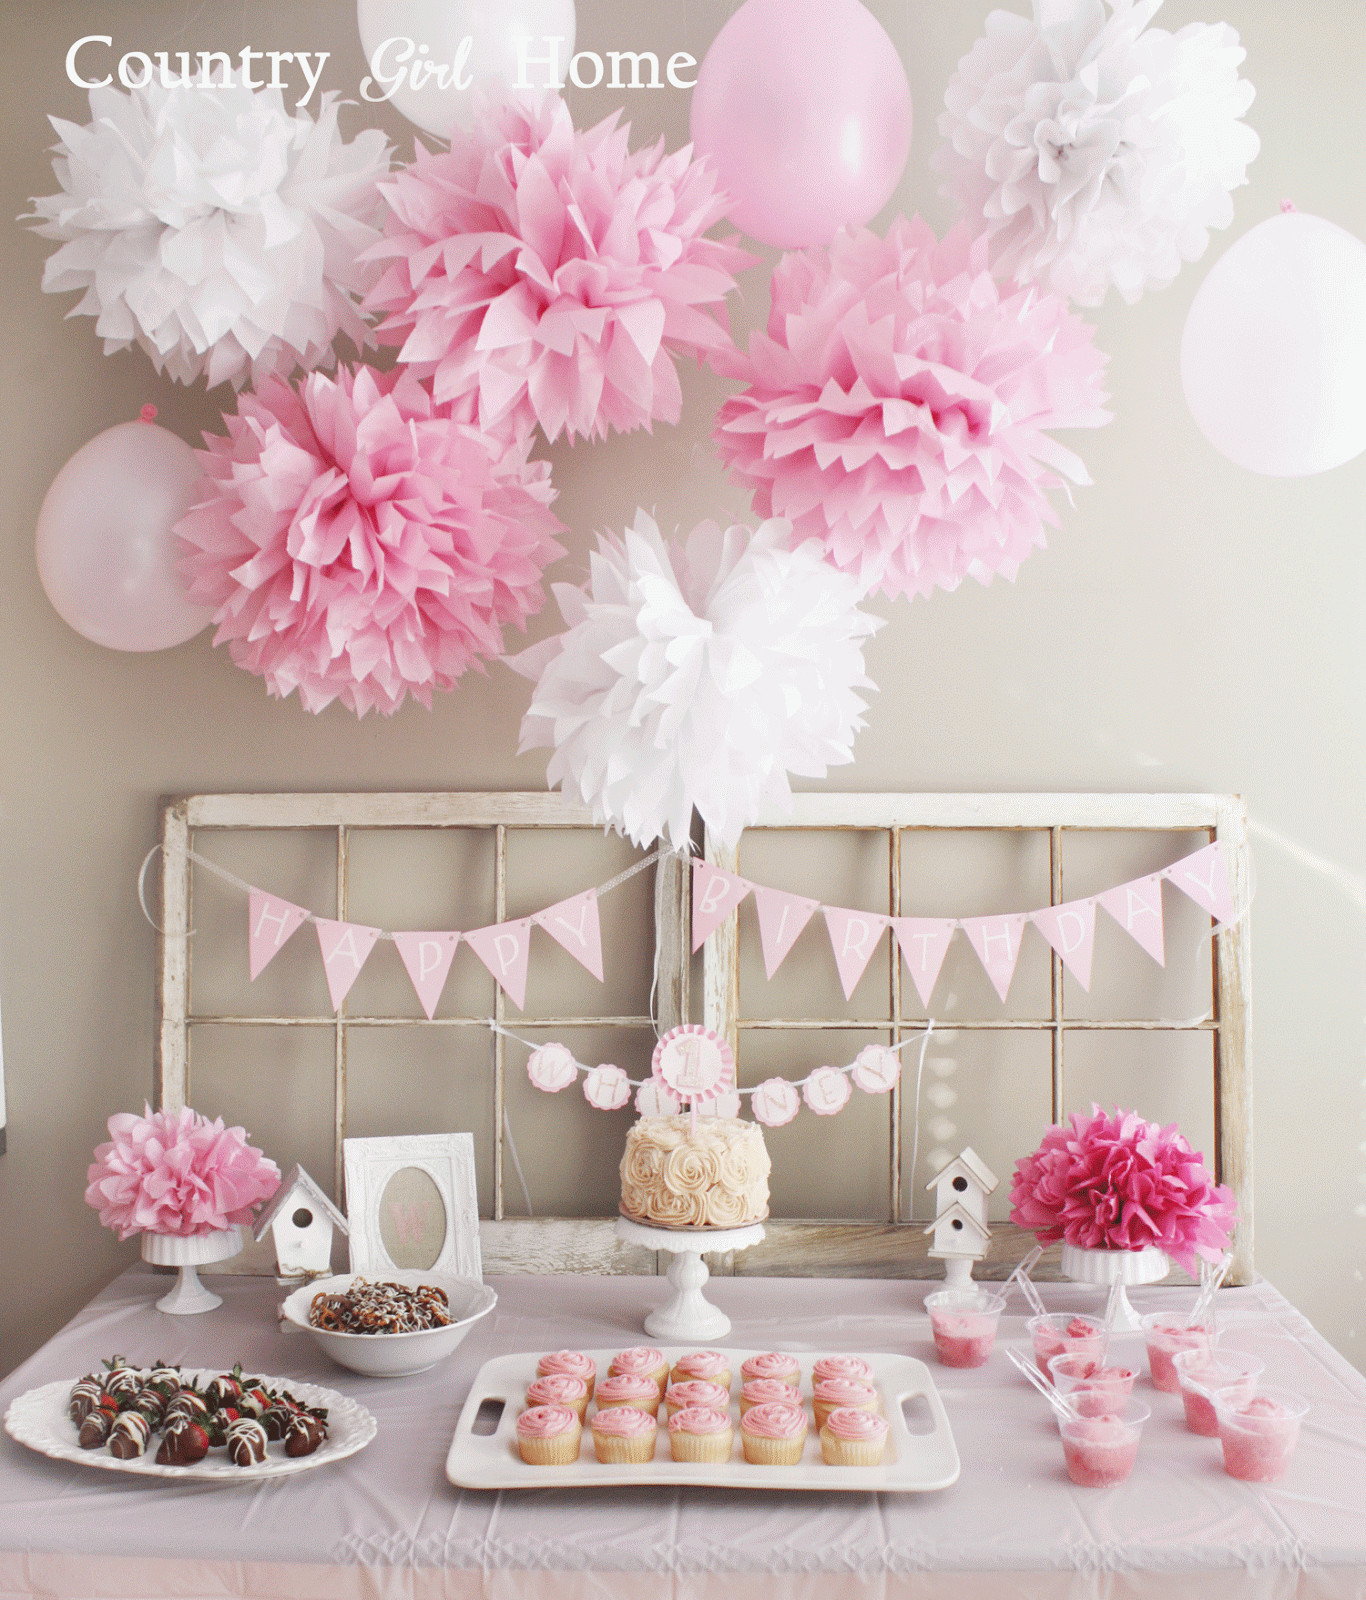 1st Birthday Decorating Ideas
 COUNTRY GIRL HOME 1st Birthday